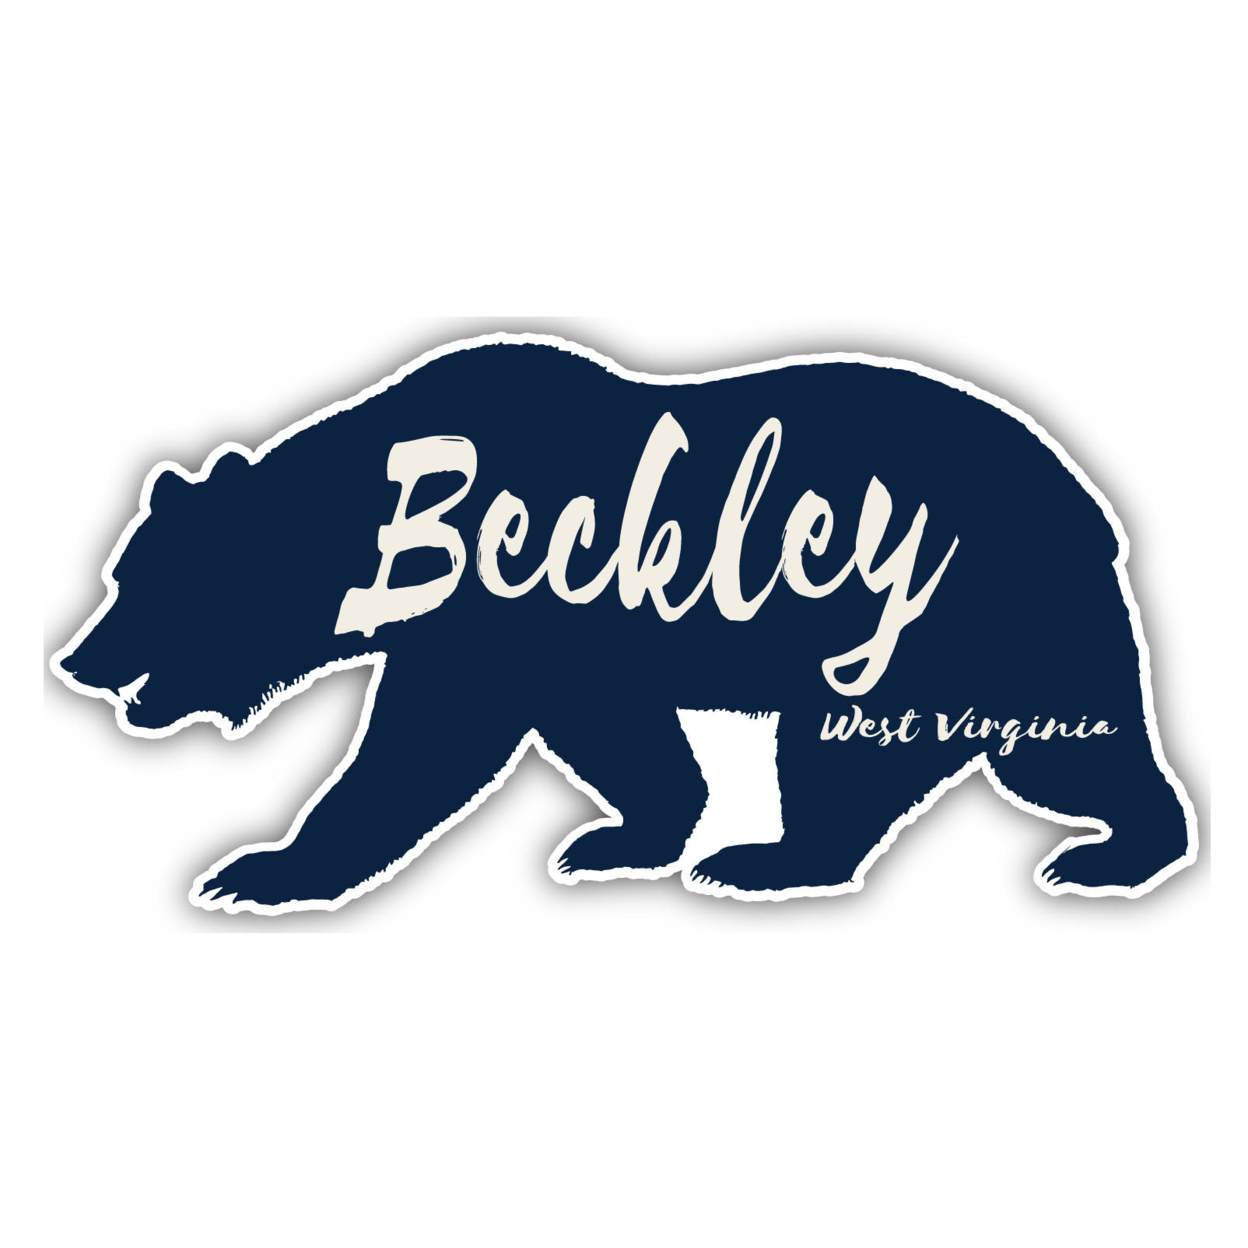 Beckley West Virginia Souvenir Decorative Stickers (Choose Theme And Size) - 4-Pack, 6-Inch, Tent